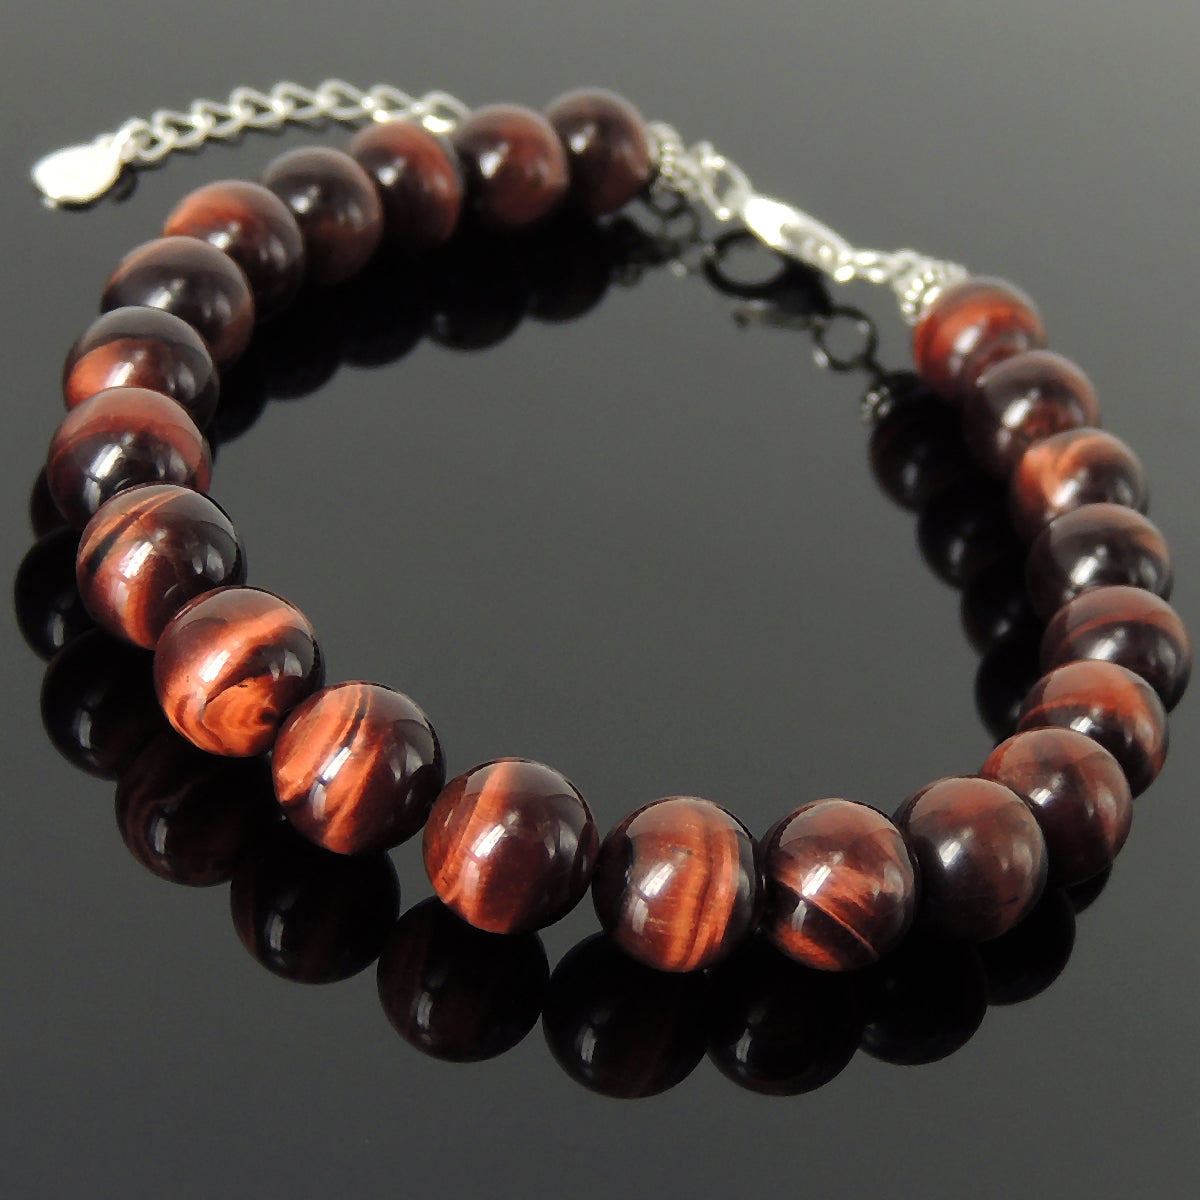 8mm Red Tiger Eye Healing Gemstone Bracelet with S925 Sterling Silver Beads, Chain, & Clasp - Handmade by Gem & Silver BR1351